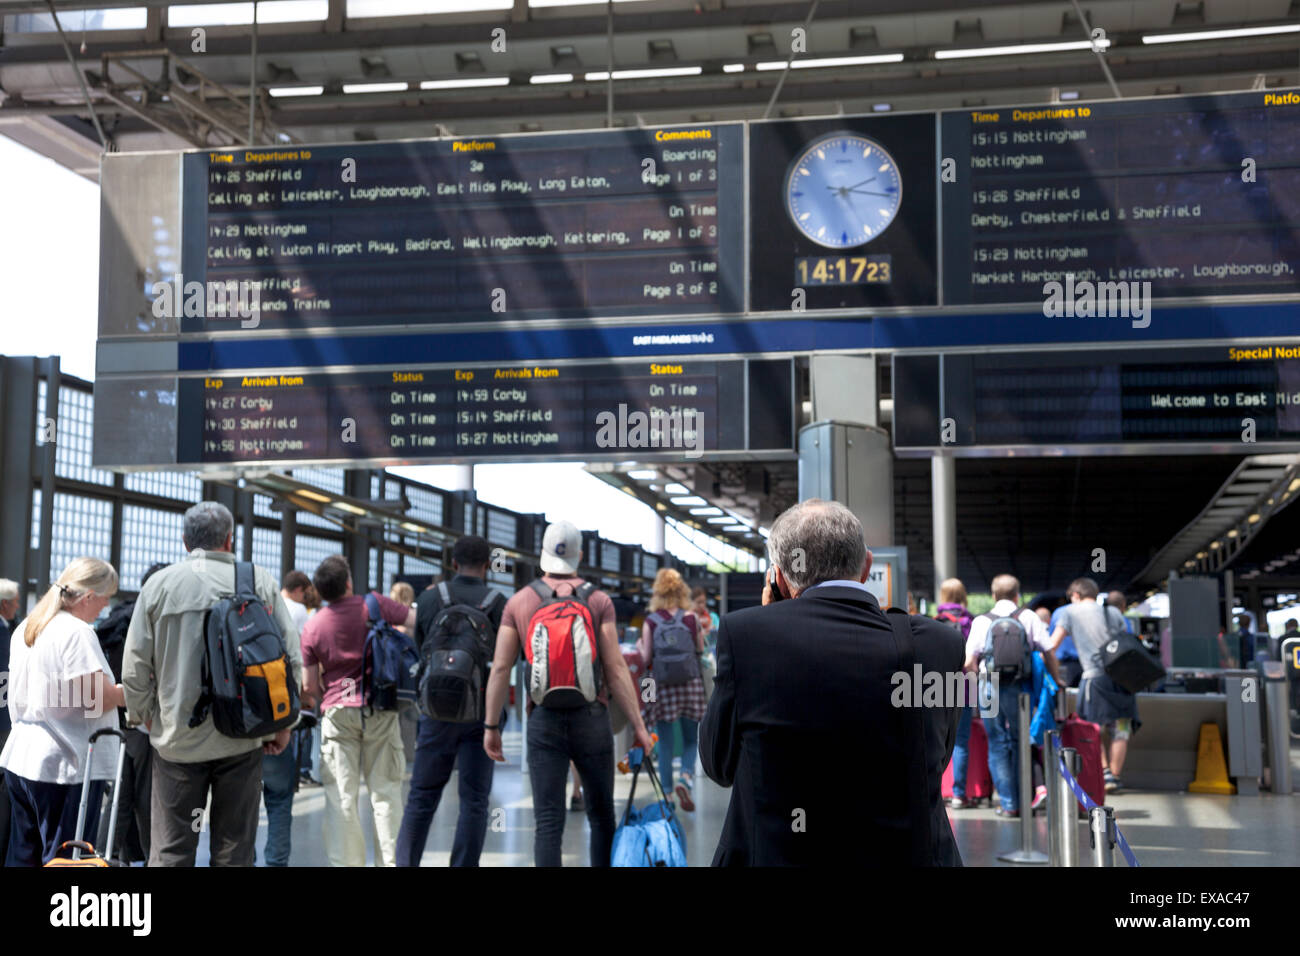 People checking times at a train station during London tube strike 9th July 2015 - St Pancras Station Stock Photo